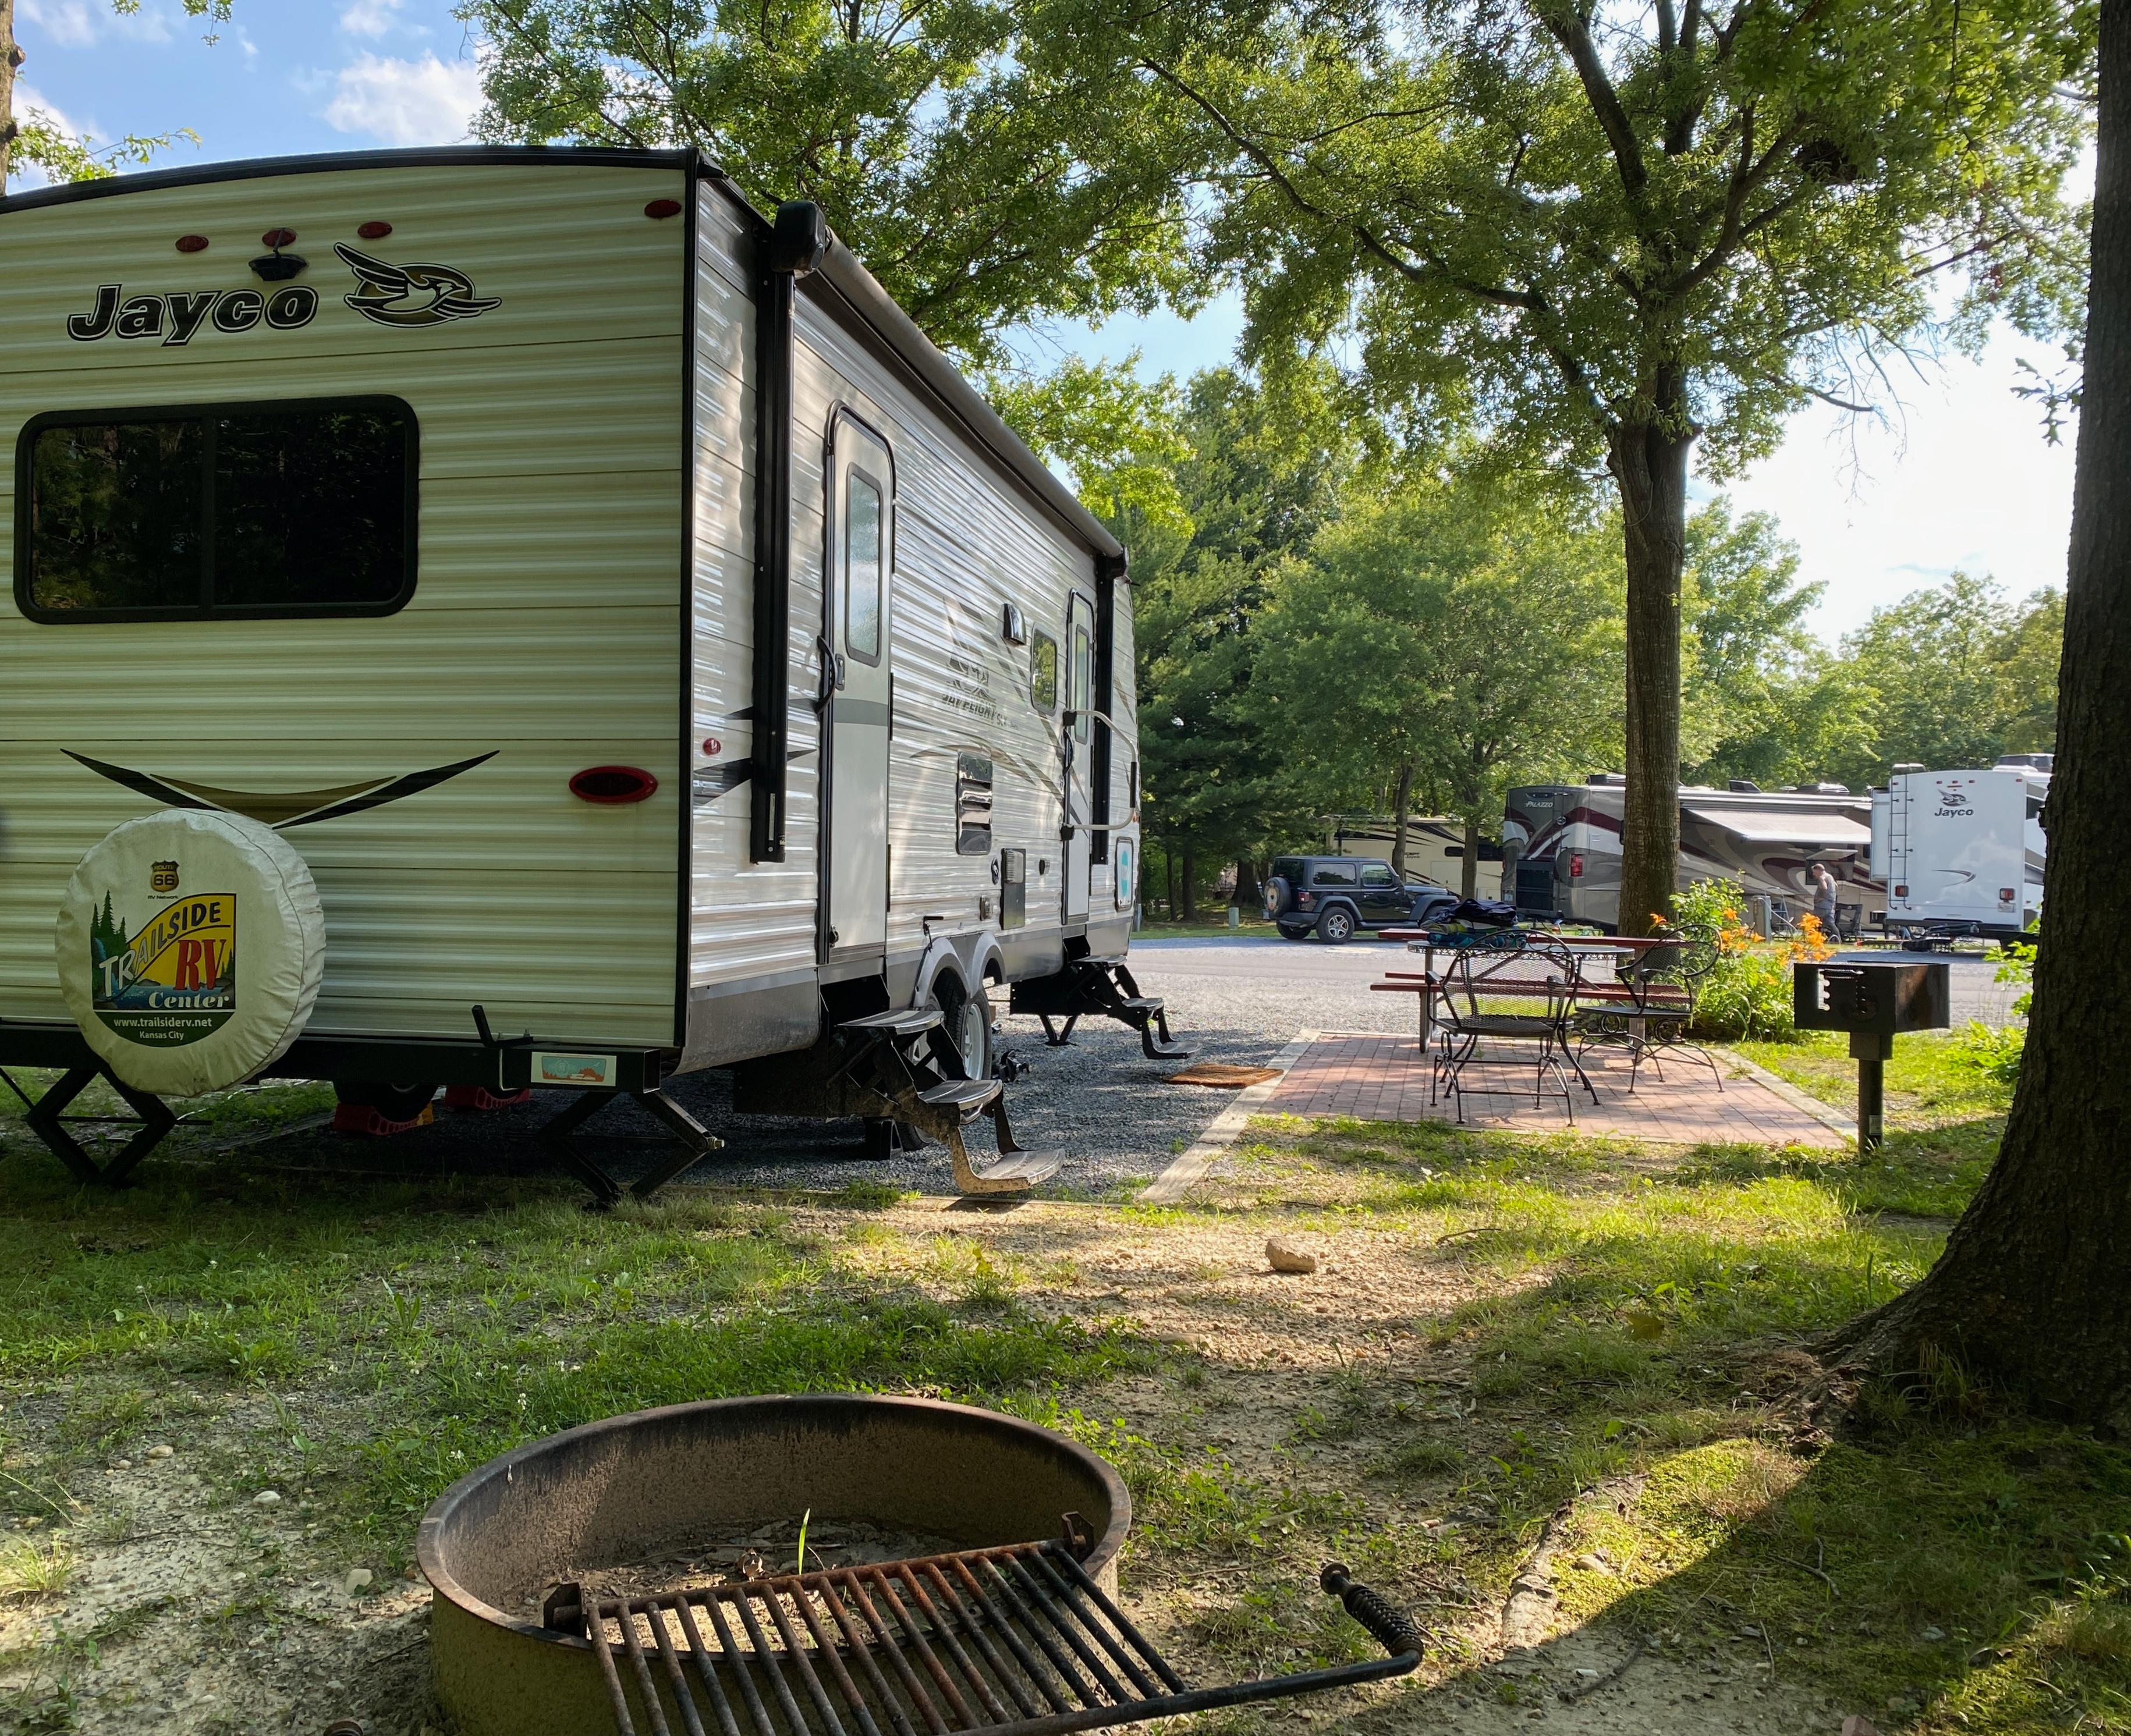 View from behind of RV trailer in a campsite.